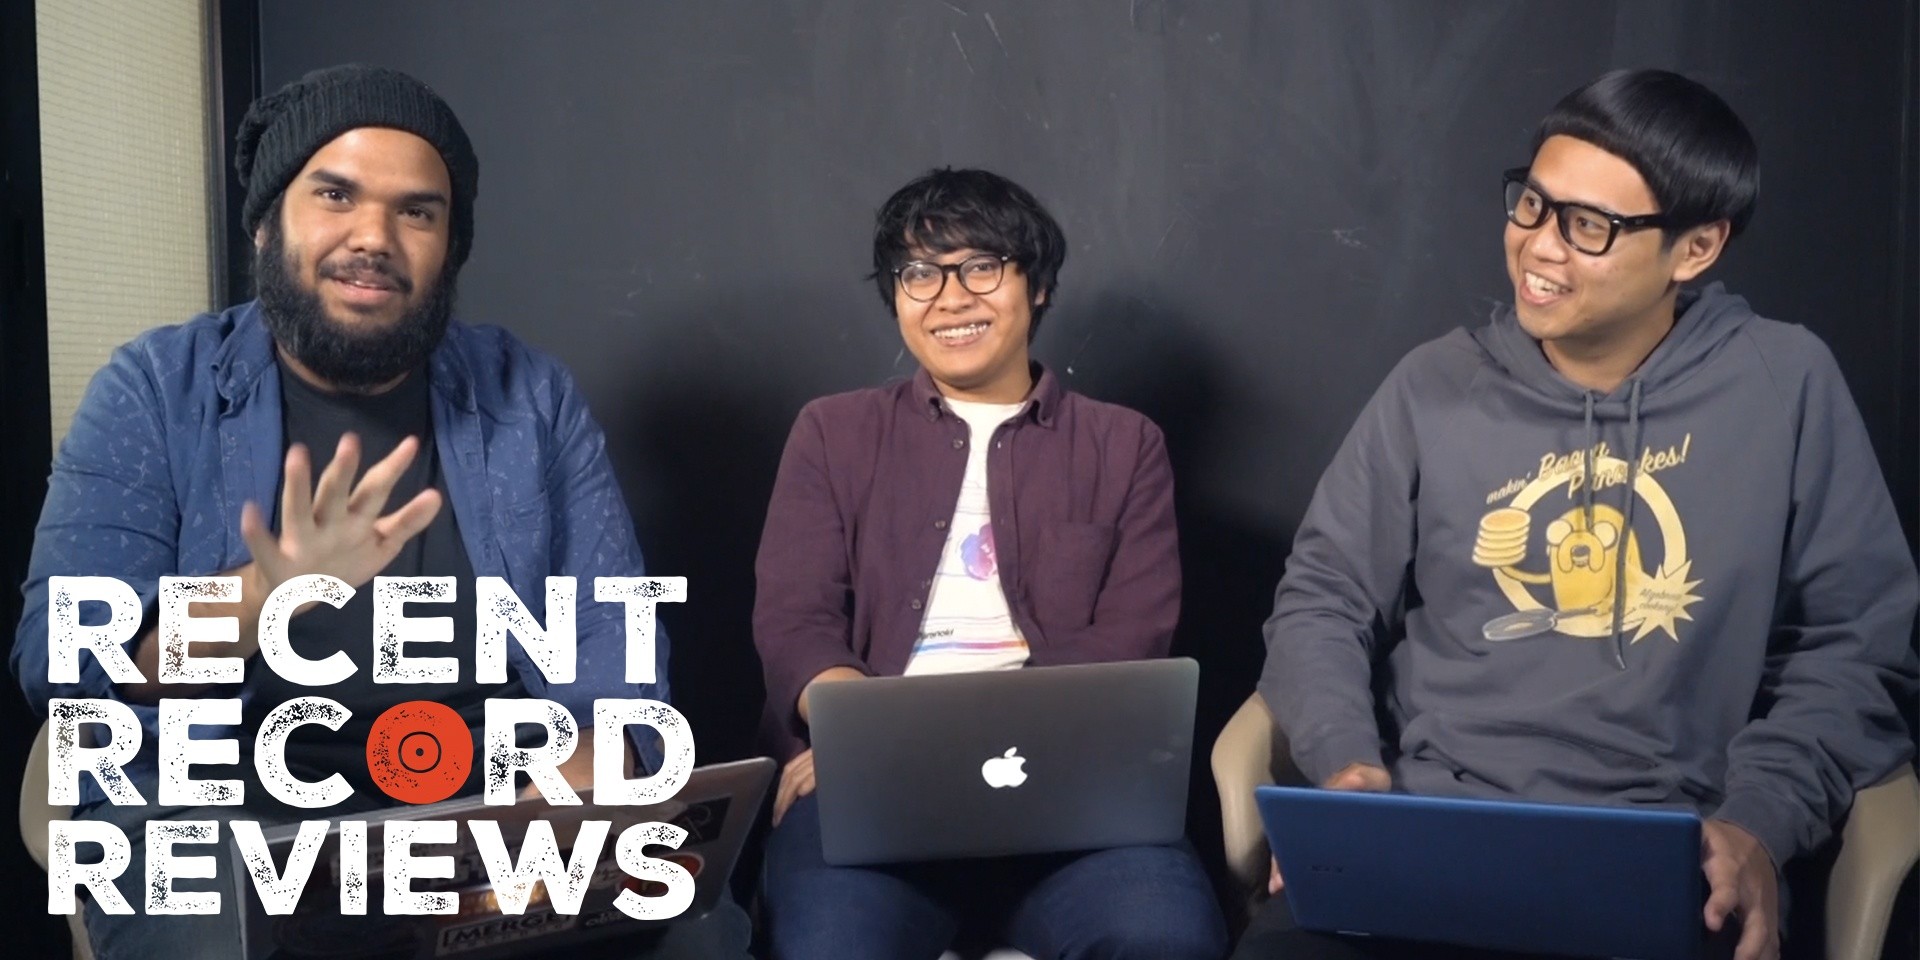 WATCH: Bandwagon Recent Record Reviews #012 - Shaky Wrists, asyraft, The Observatory